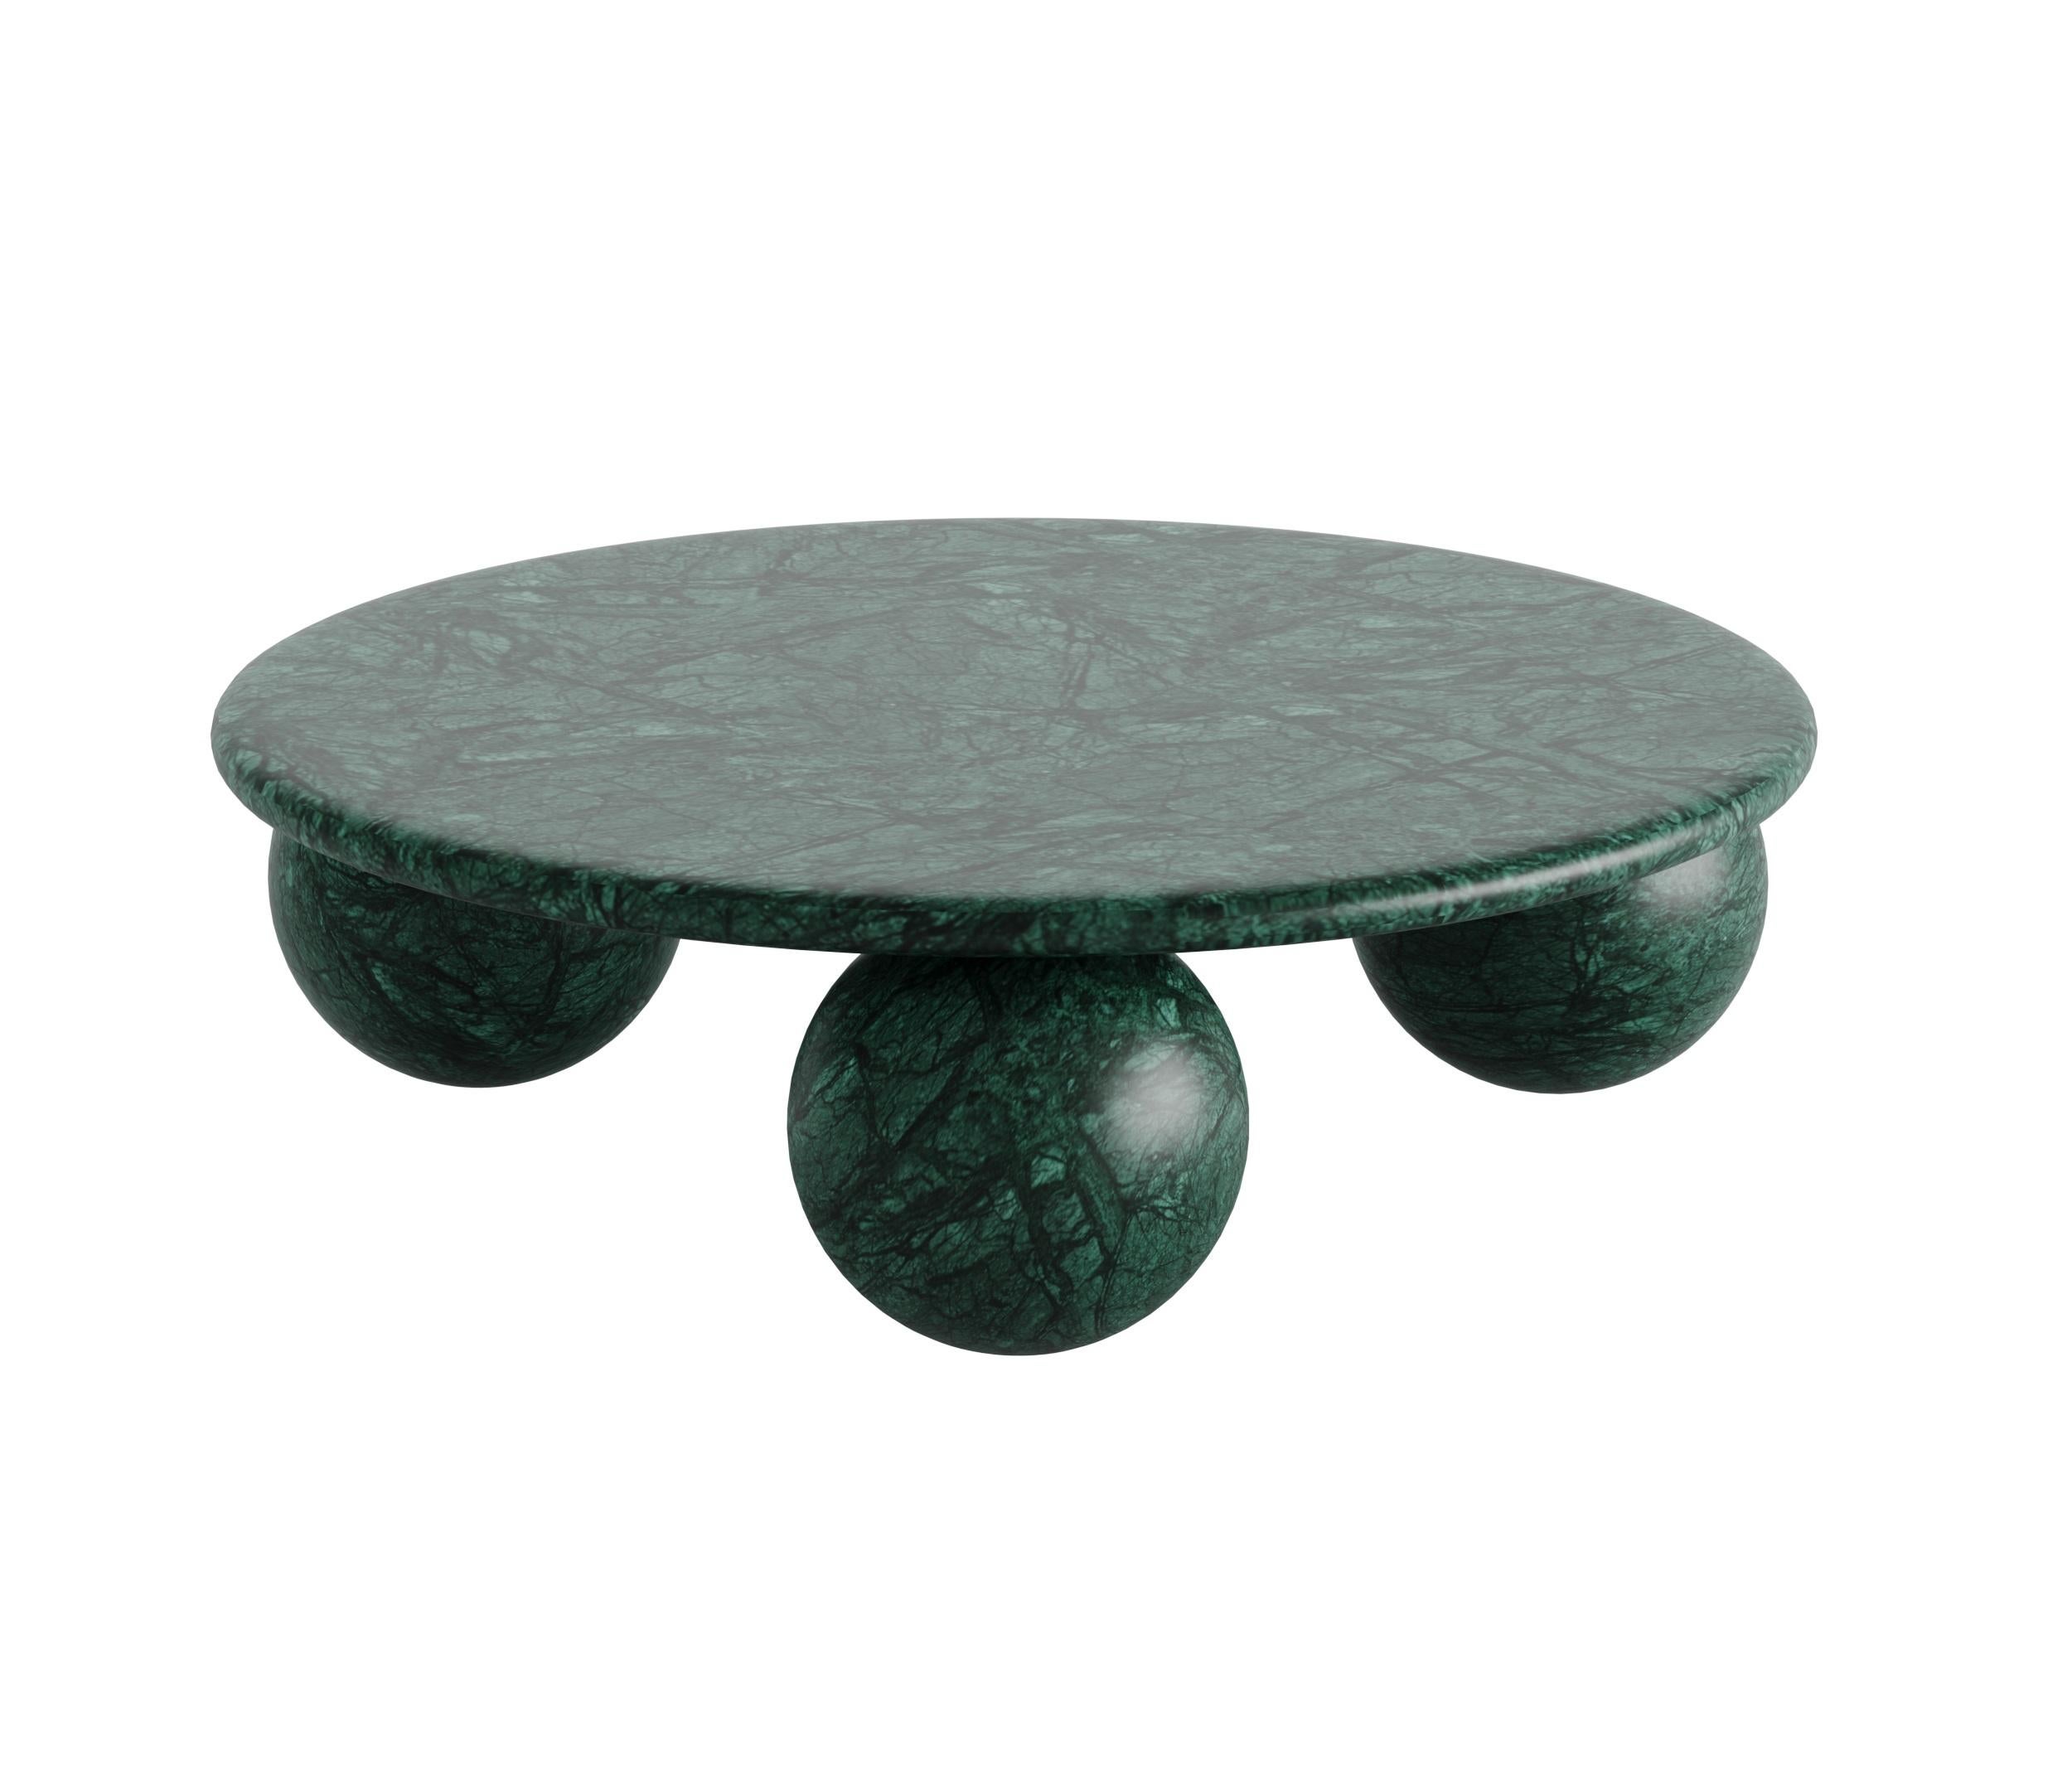 Indian Globe Lux Center Table in Jurrasic Green Marble For Sale